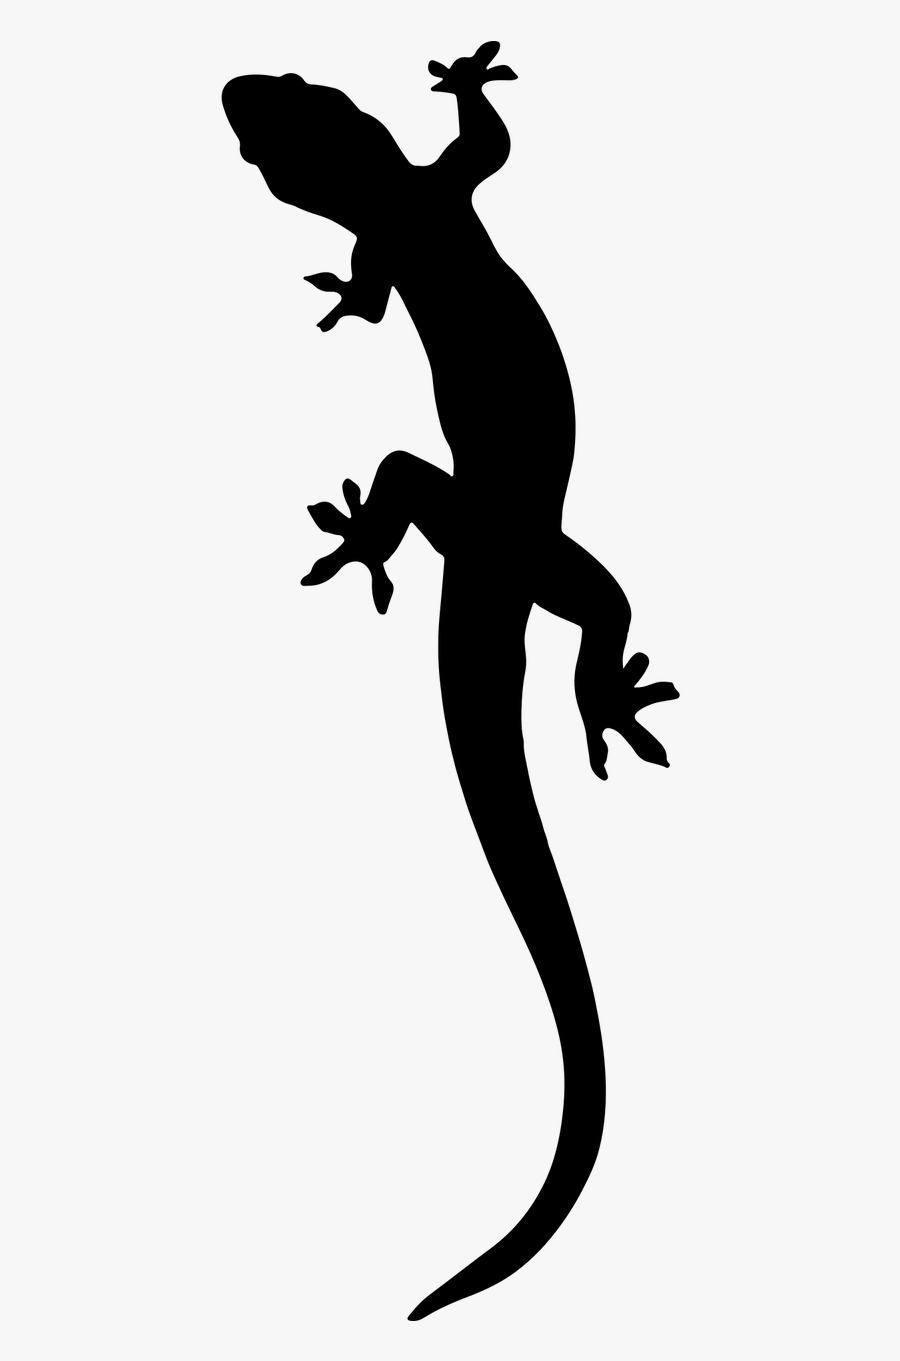 Free Image On Pixabay - Silhouette Lizards Clipart Black And White, Transparent Clipart